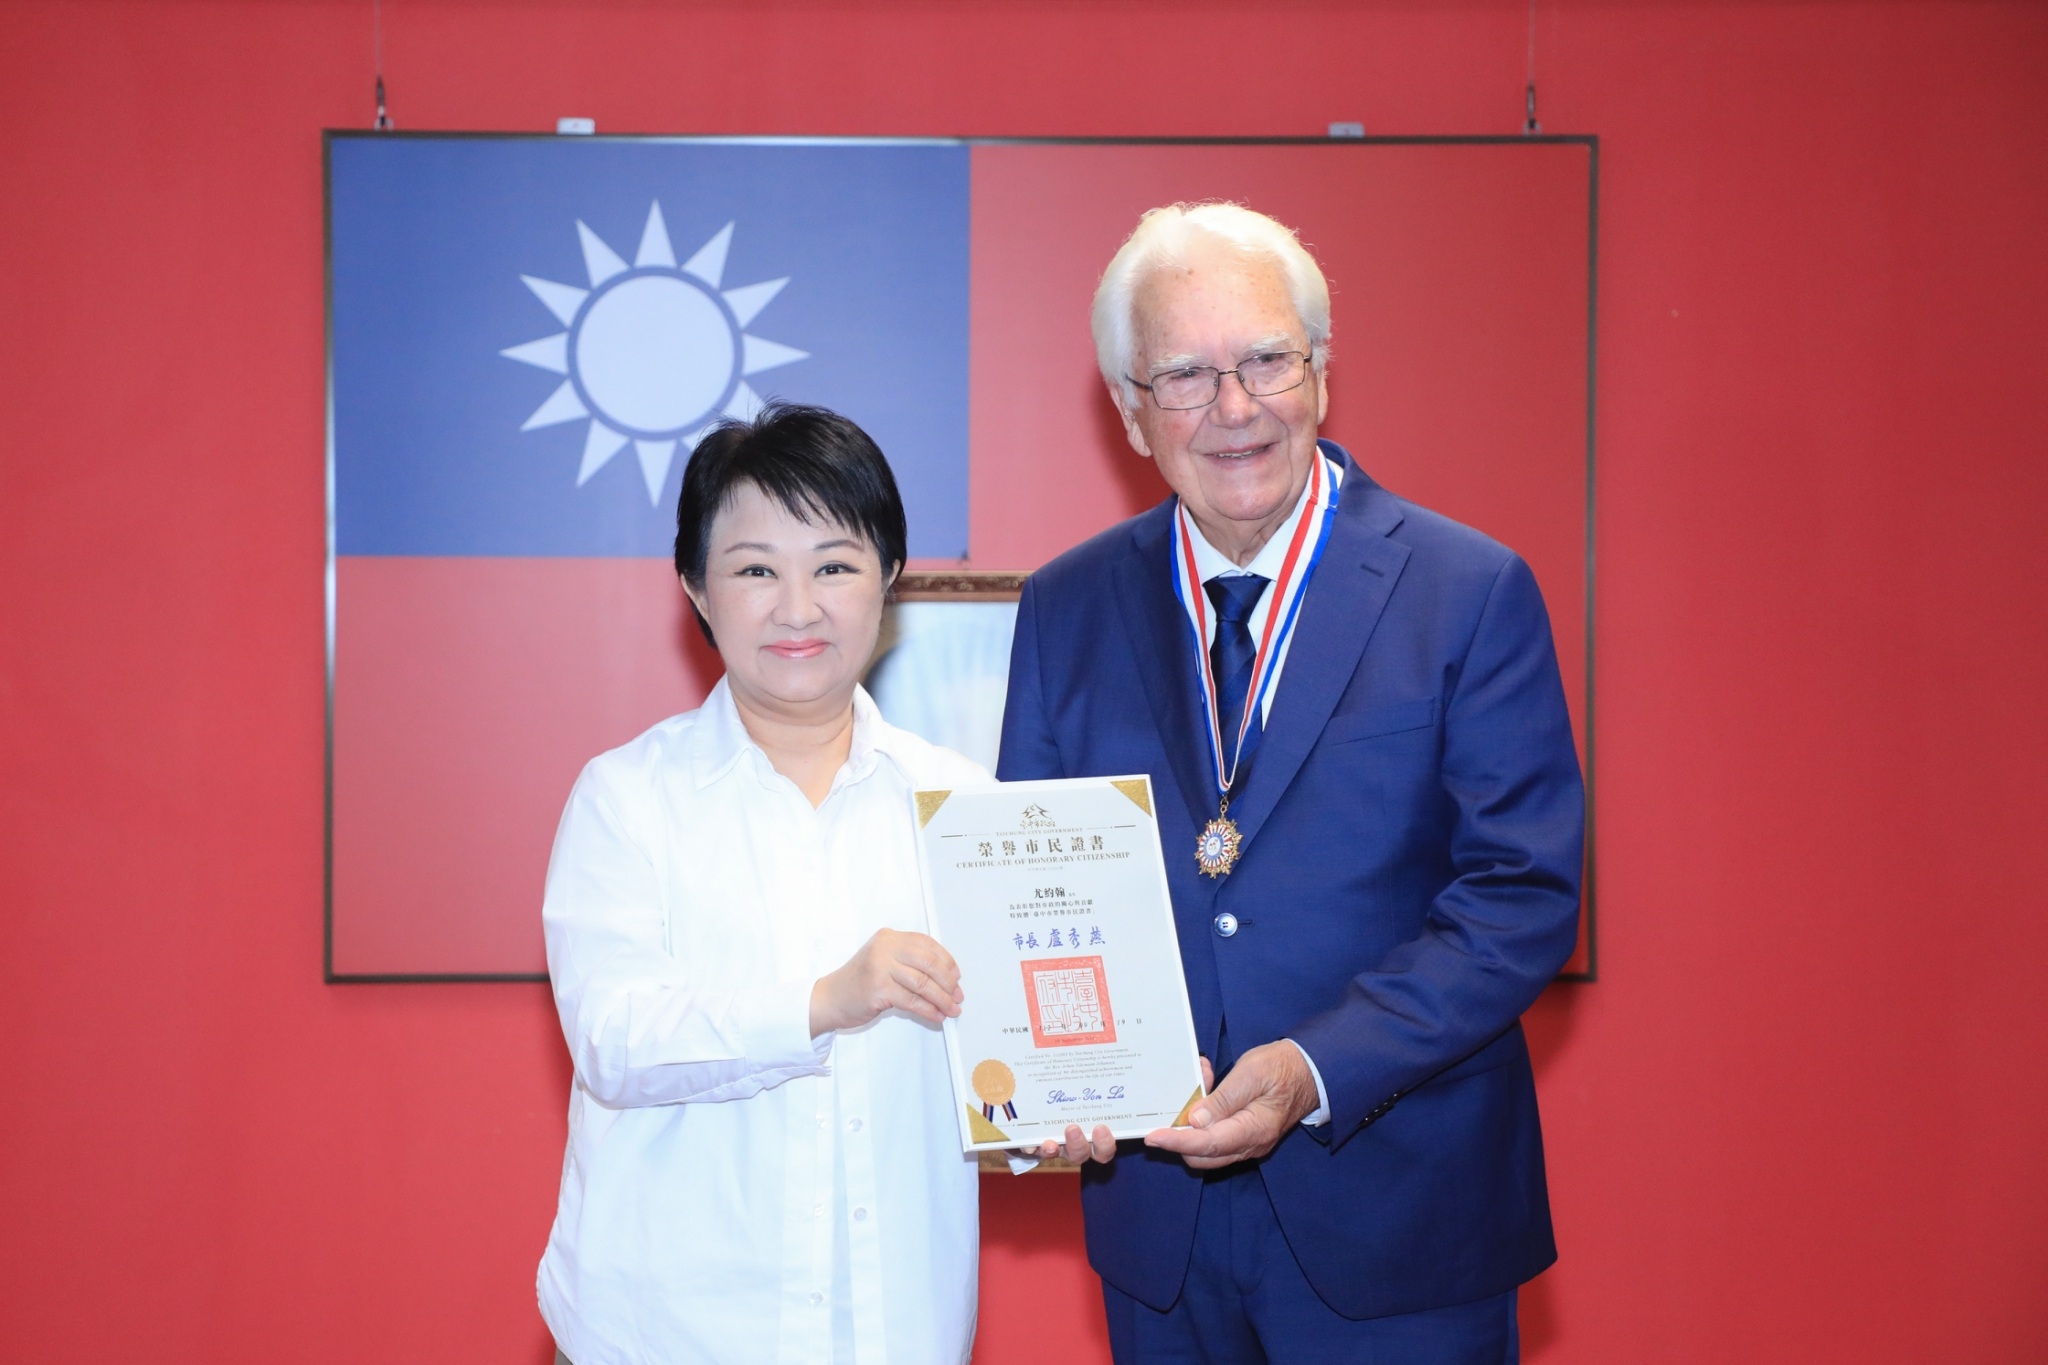 Pastor Johan Tidemann Johansen received the title of Honorary Citizen from the Taichung Mayor